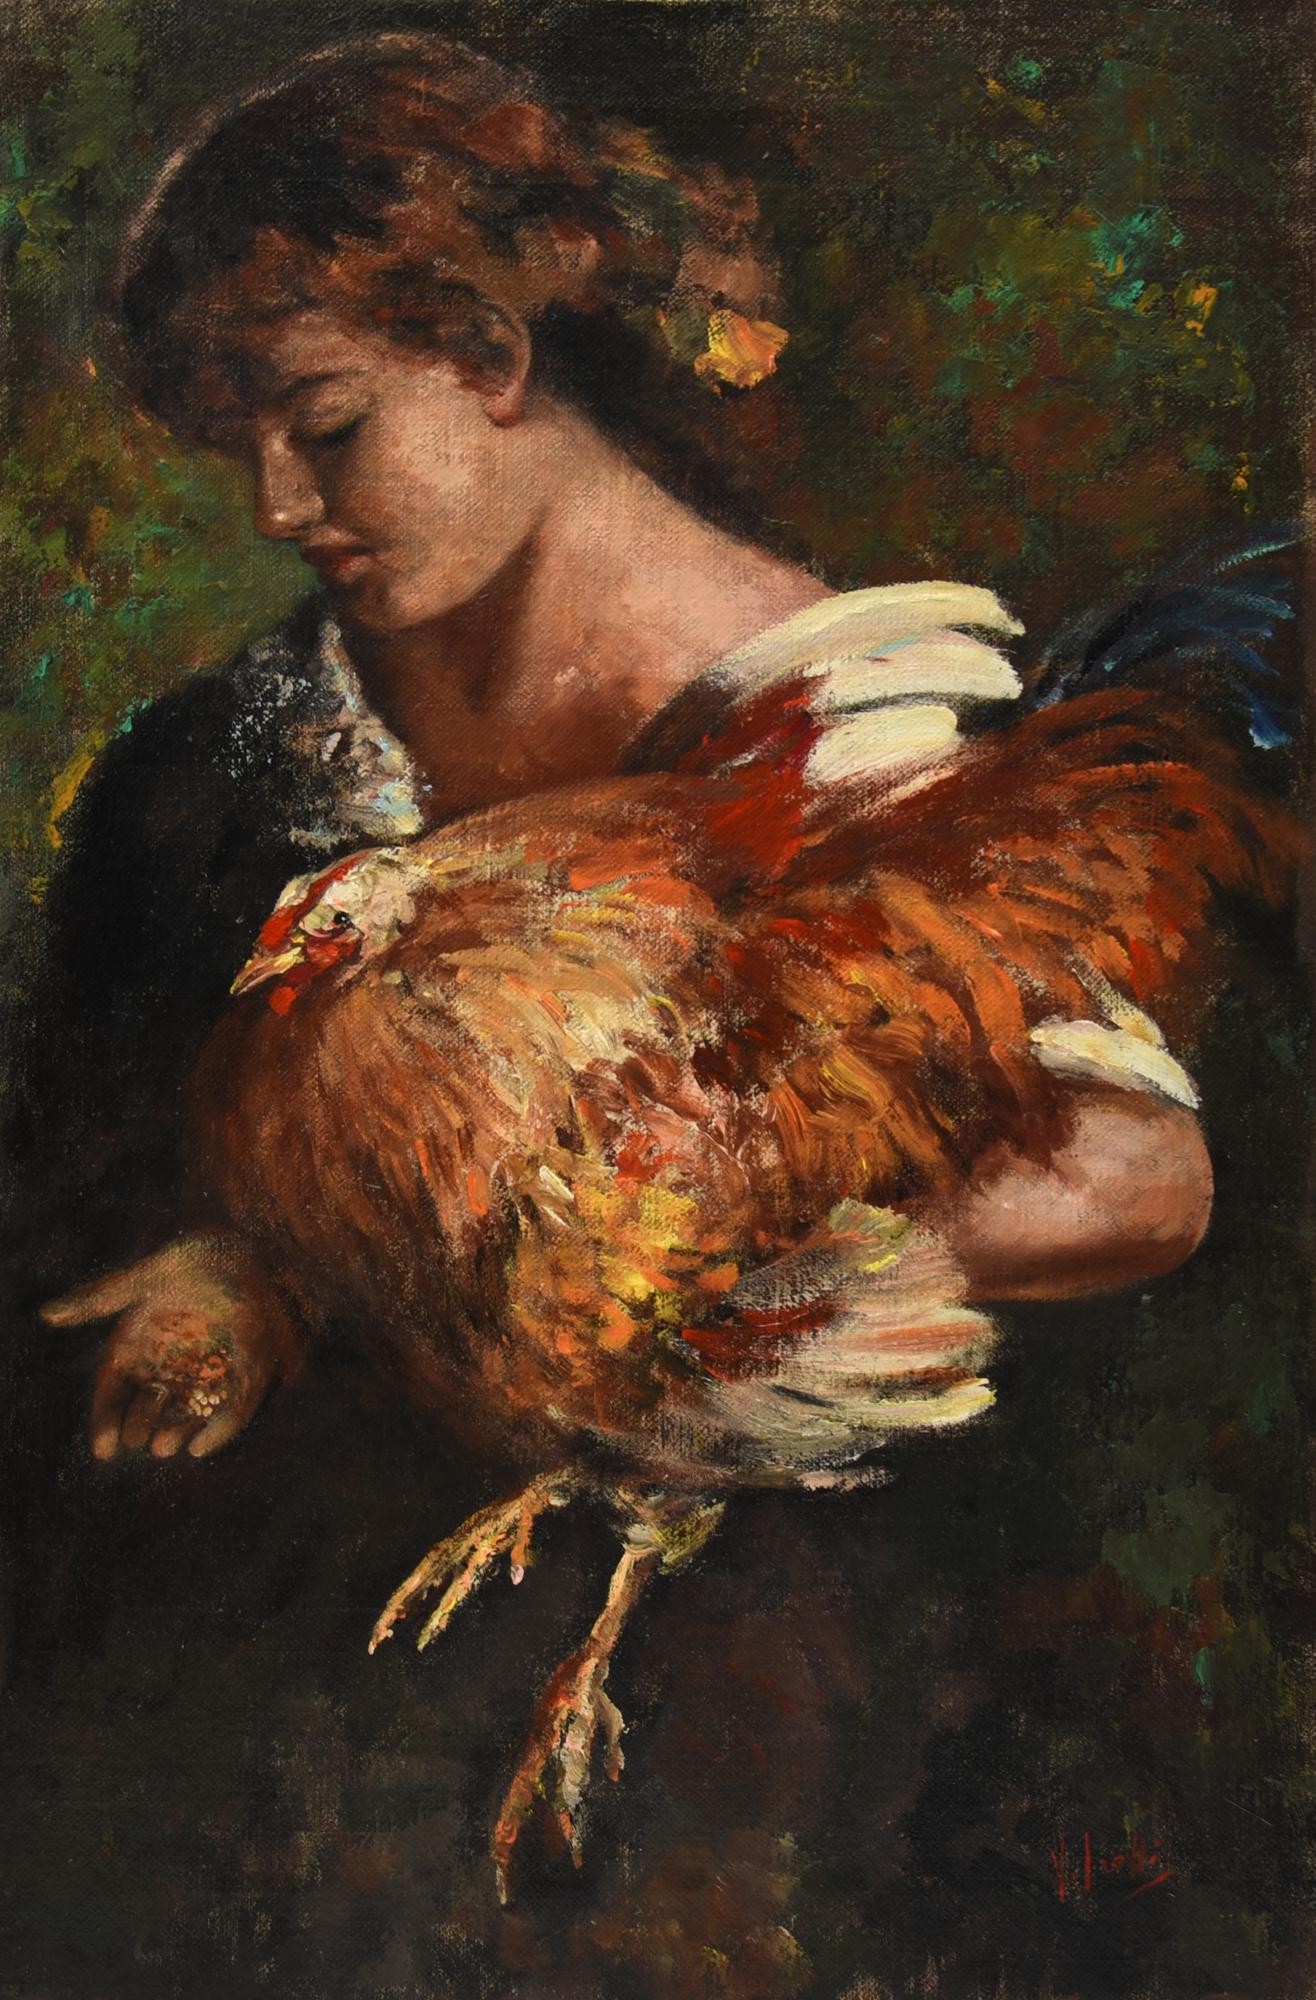 Artwork by Vincenzo Irolli, FANCIULLA CON GALLINA, Made of oil on canvas